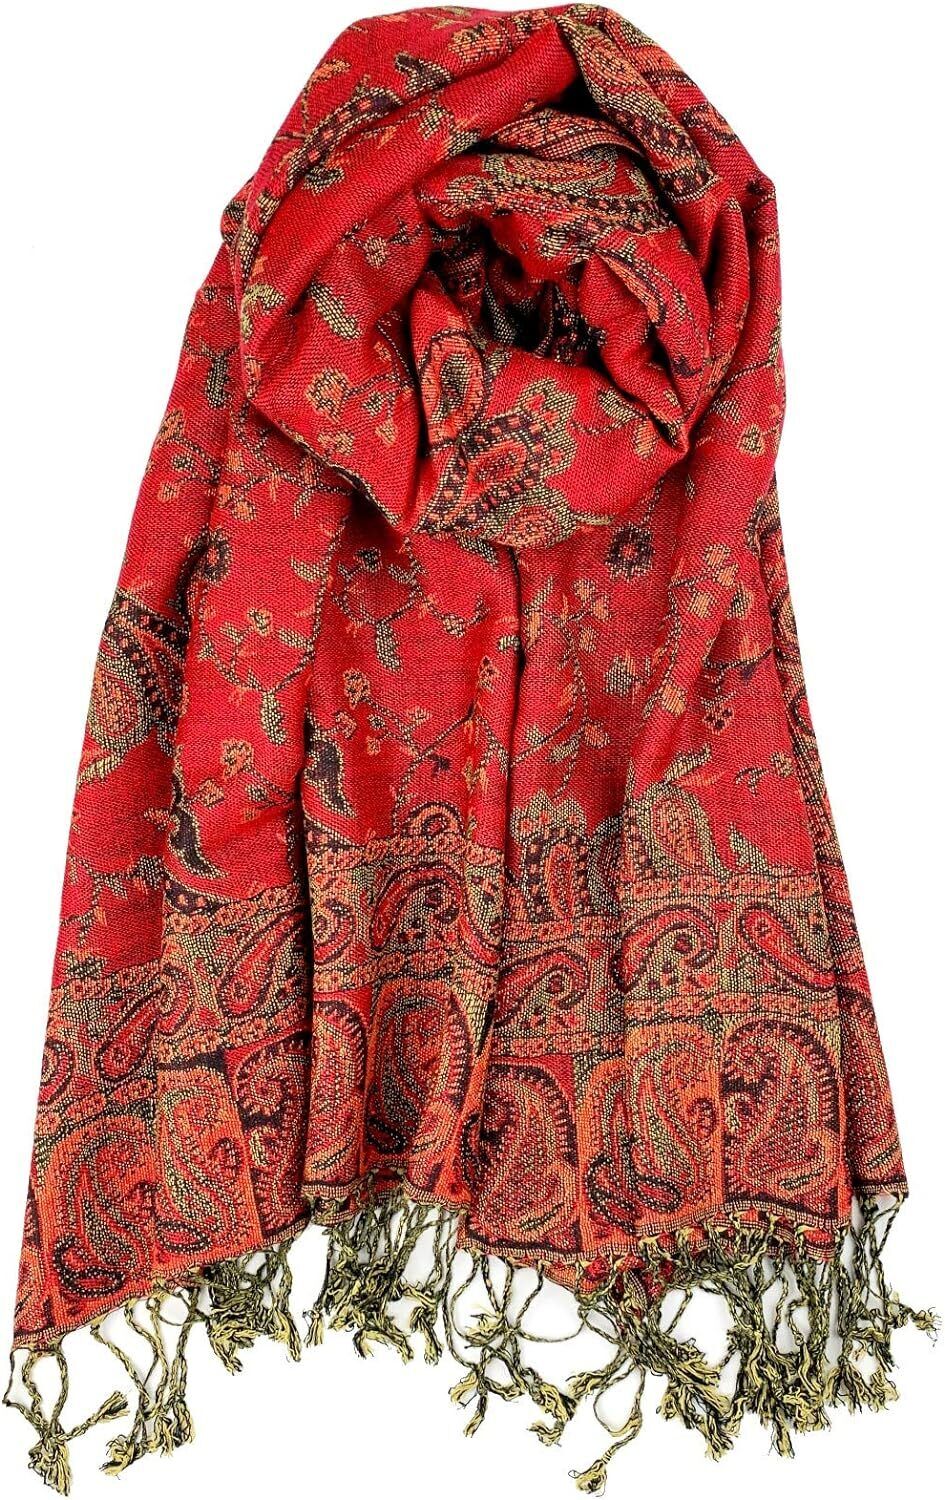 Plum Feathers Pashmina Scarf with Ethnic Tapestry Style Red Floral Paisley 